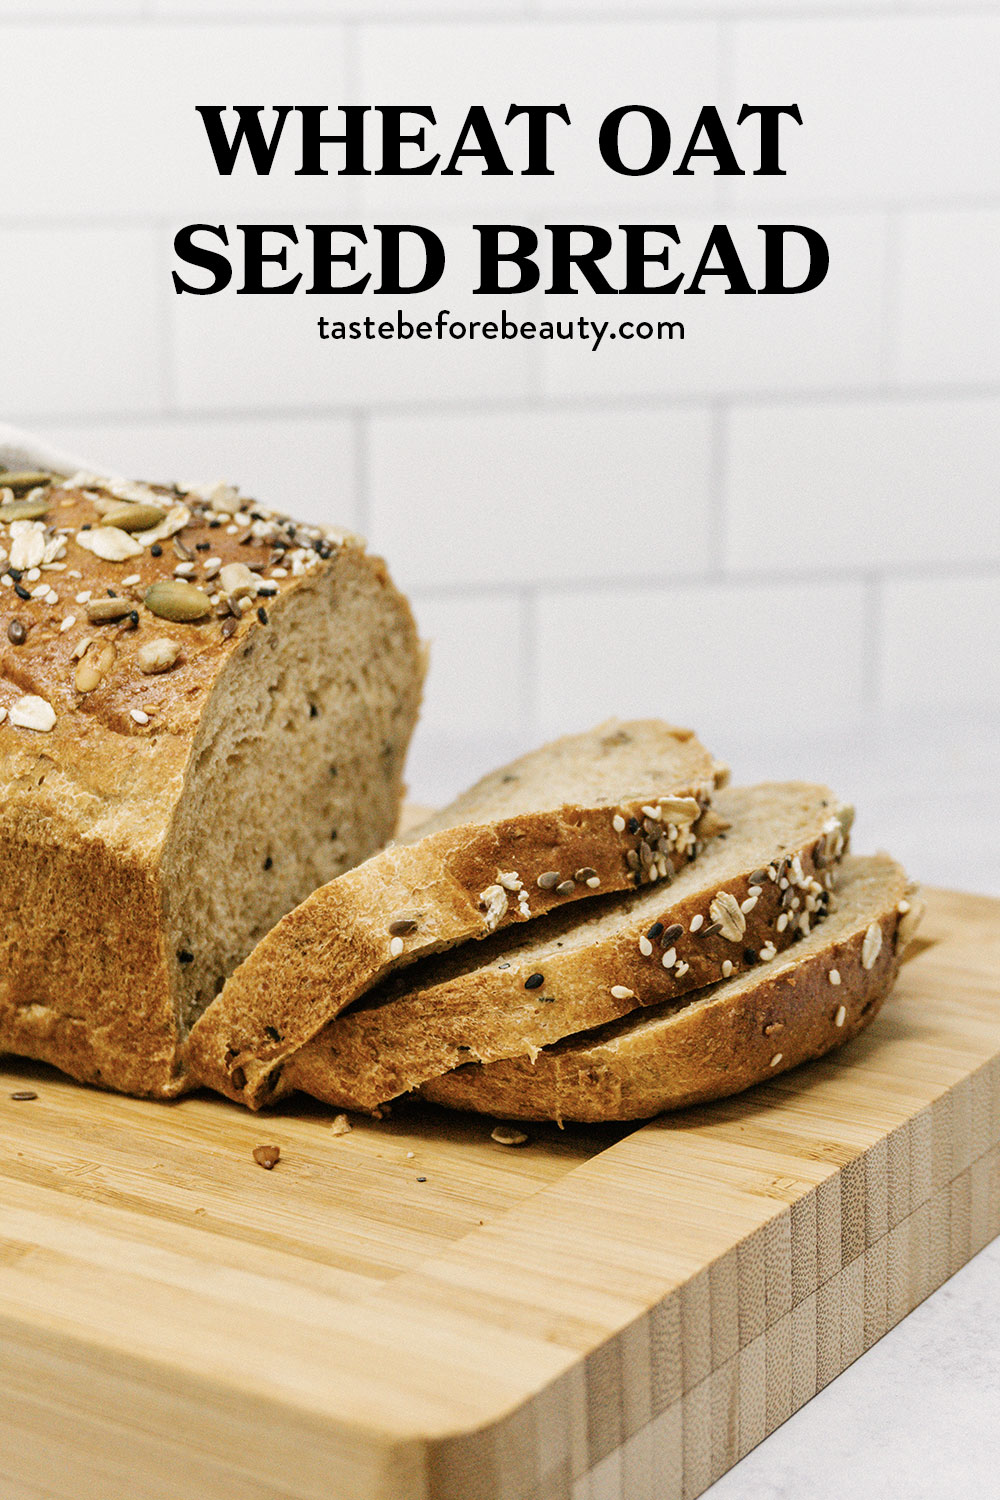 taste before beauty wheat oat seed bread with slices on cutting board pinterest pin